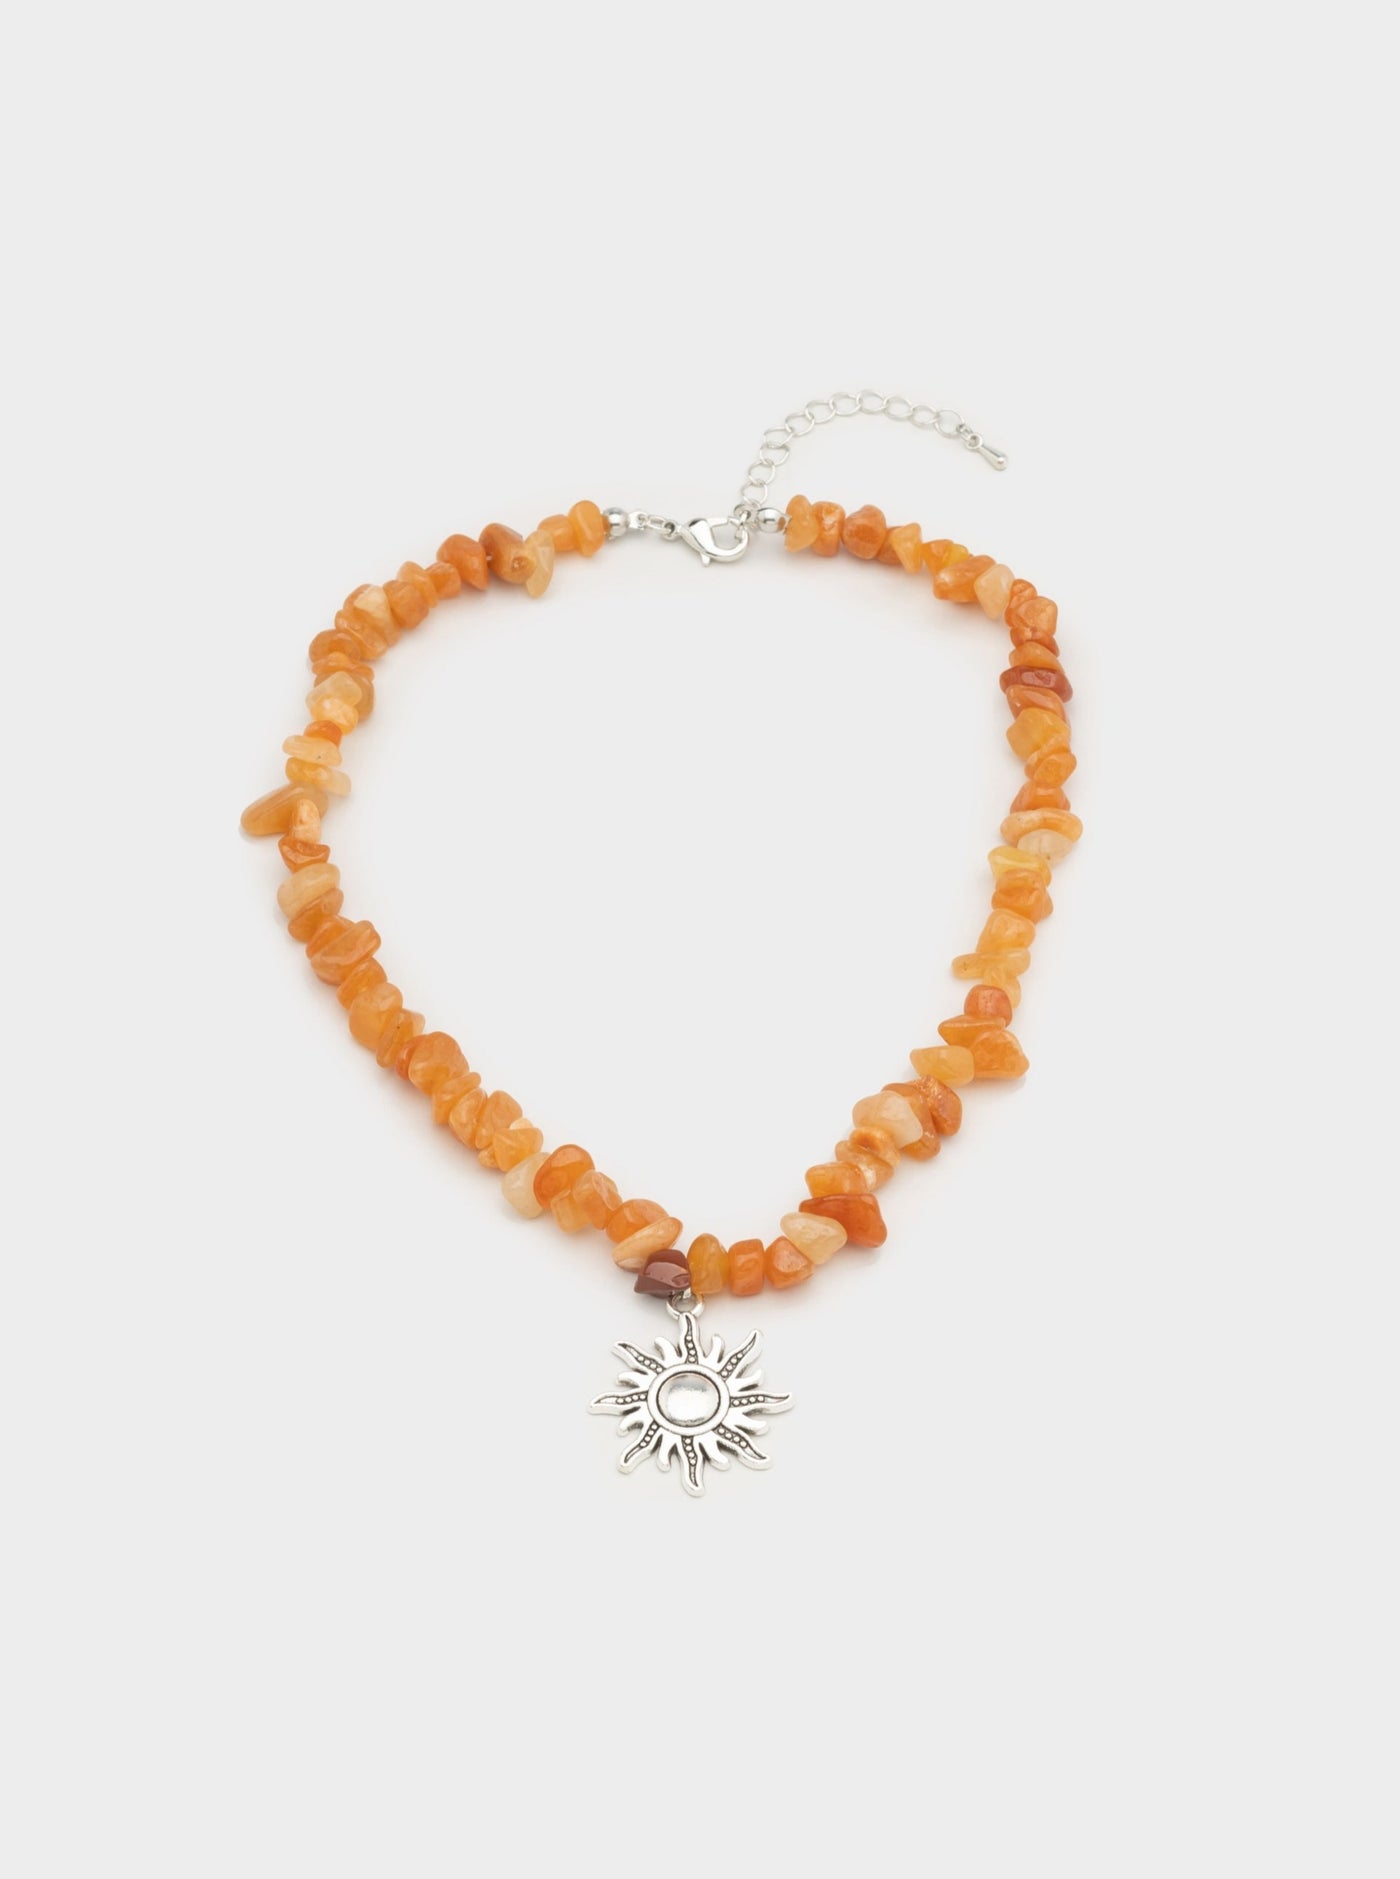 Necklace with orange stones chain and sun pendant